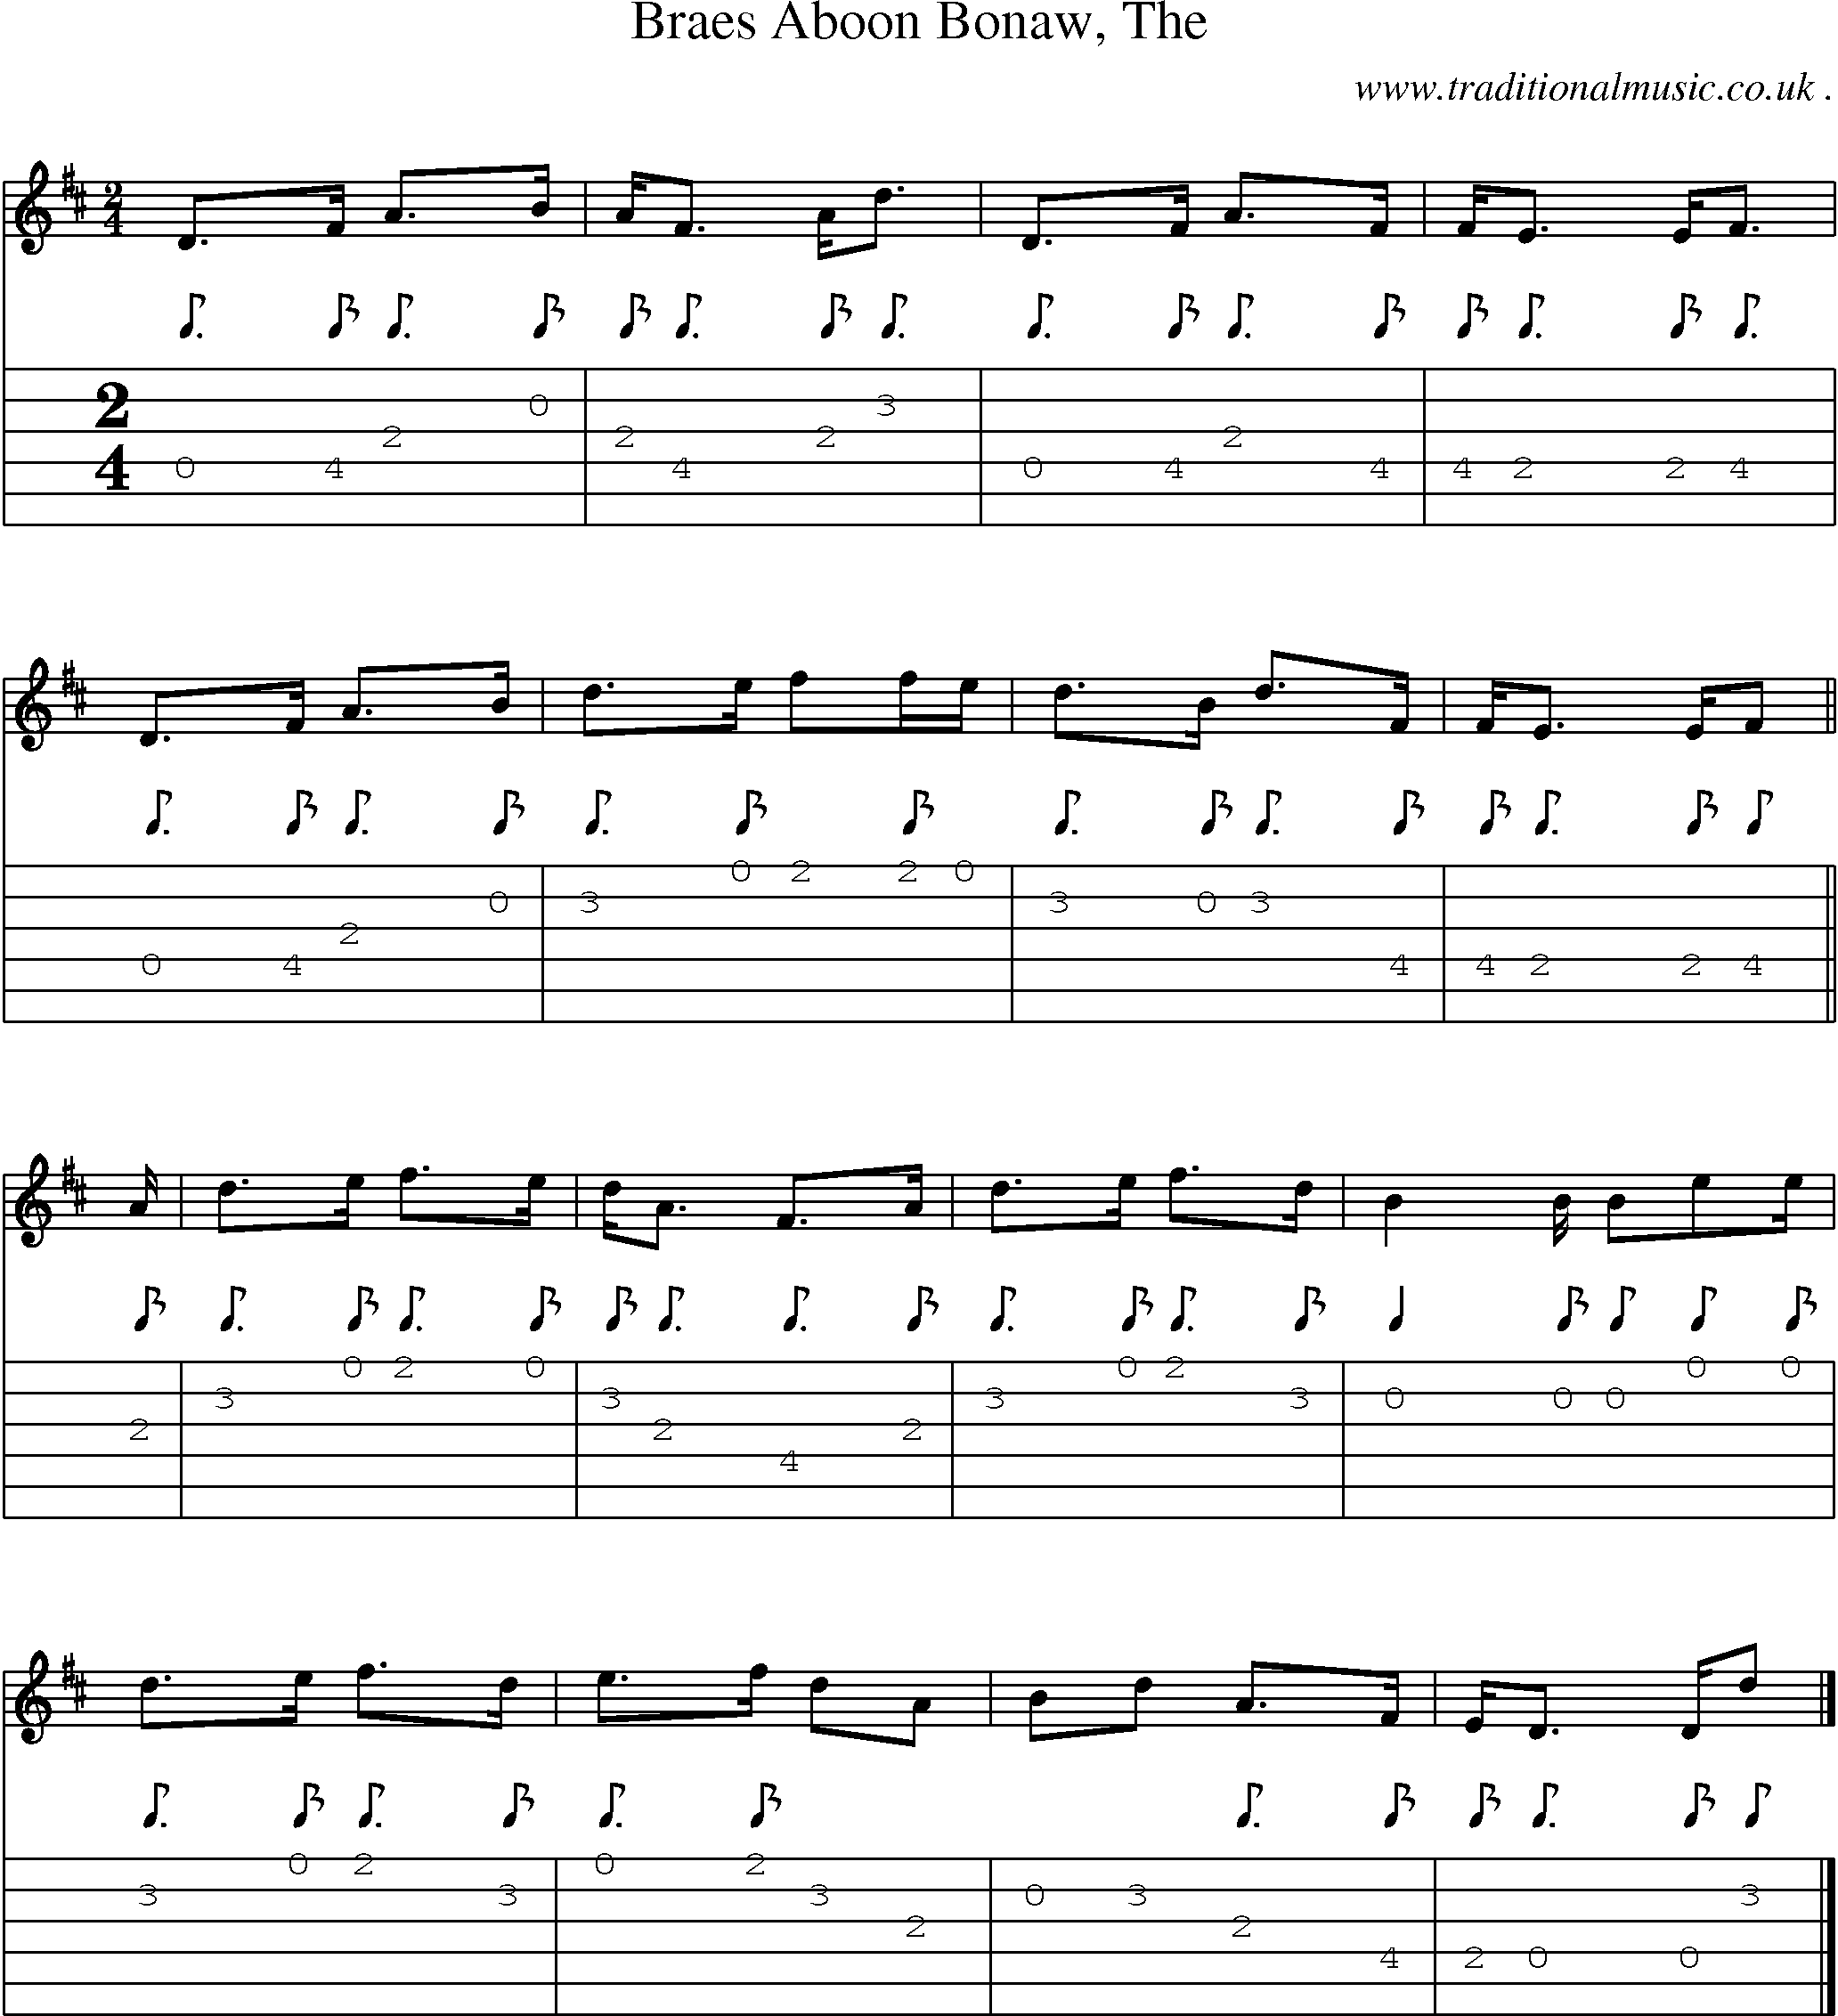 Sheet-music  score, Chords and Guitar Tabs for Braes Aboon Bonaw The